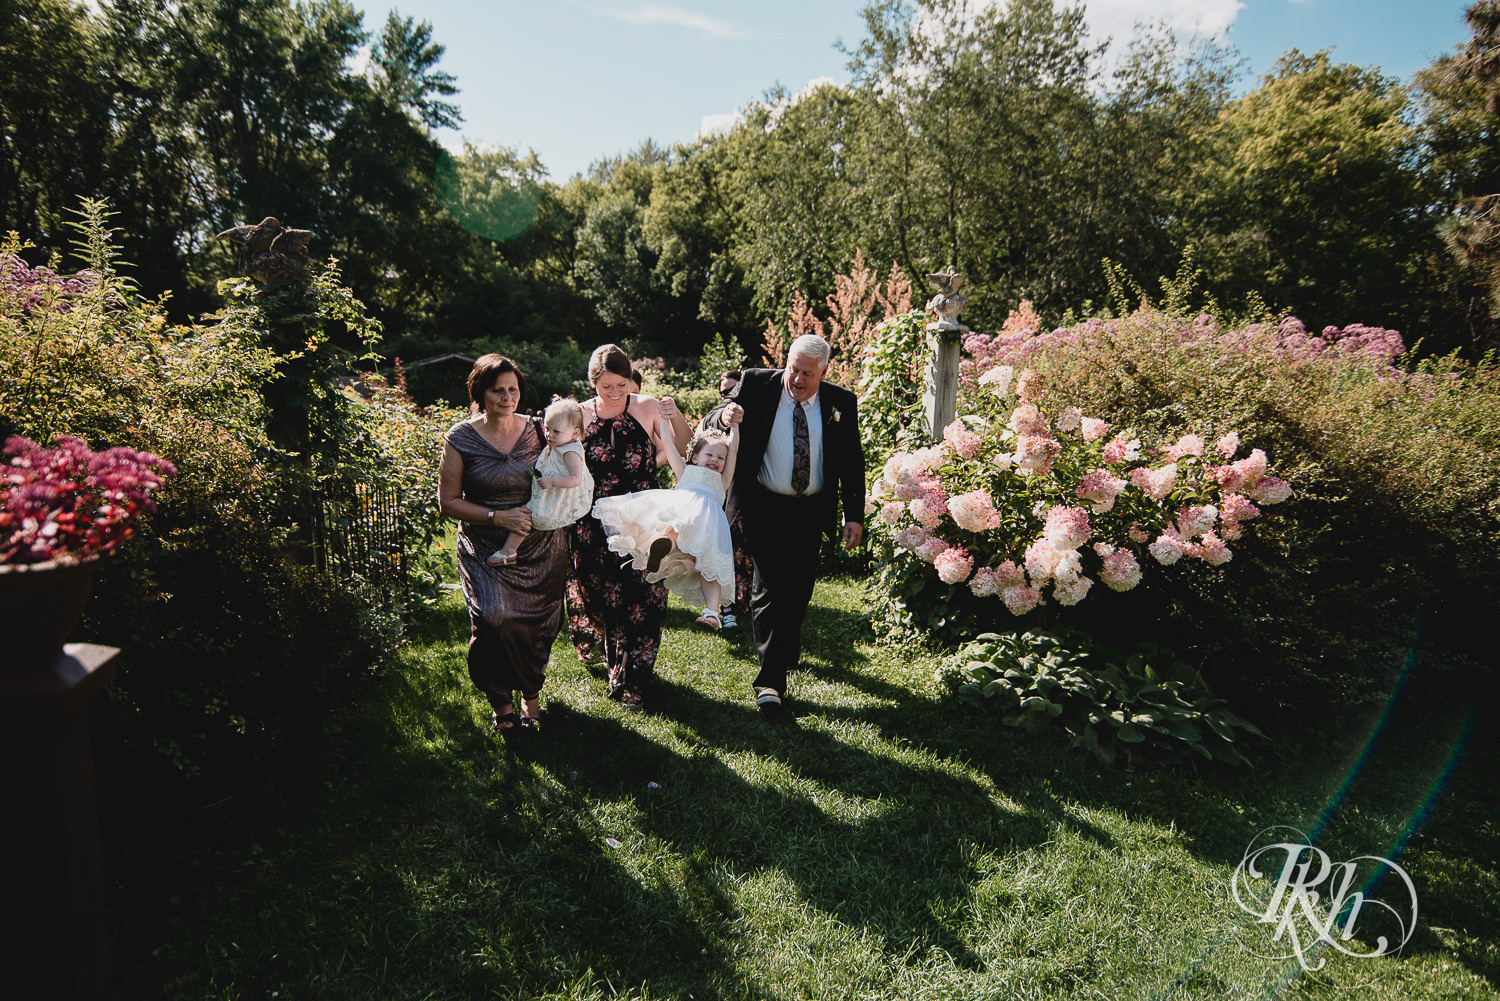 Parents walk down the aisle after wedding ceremony at Camrose Hill Flower Farm in Stillwater, Minnesota.